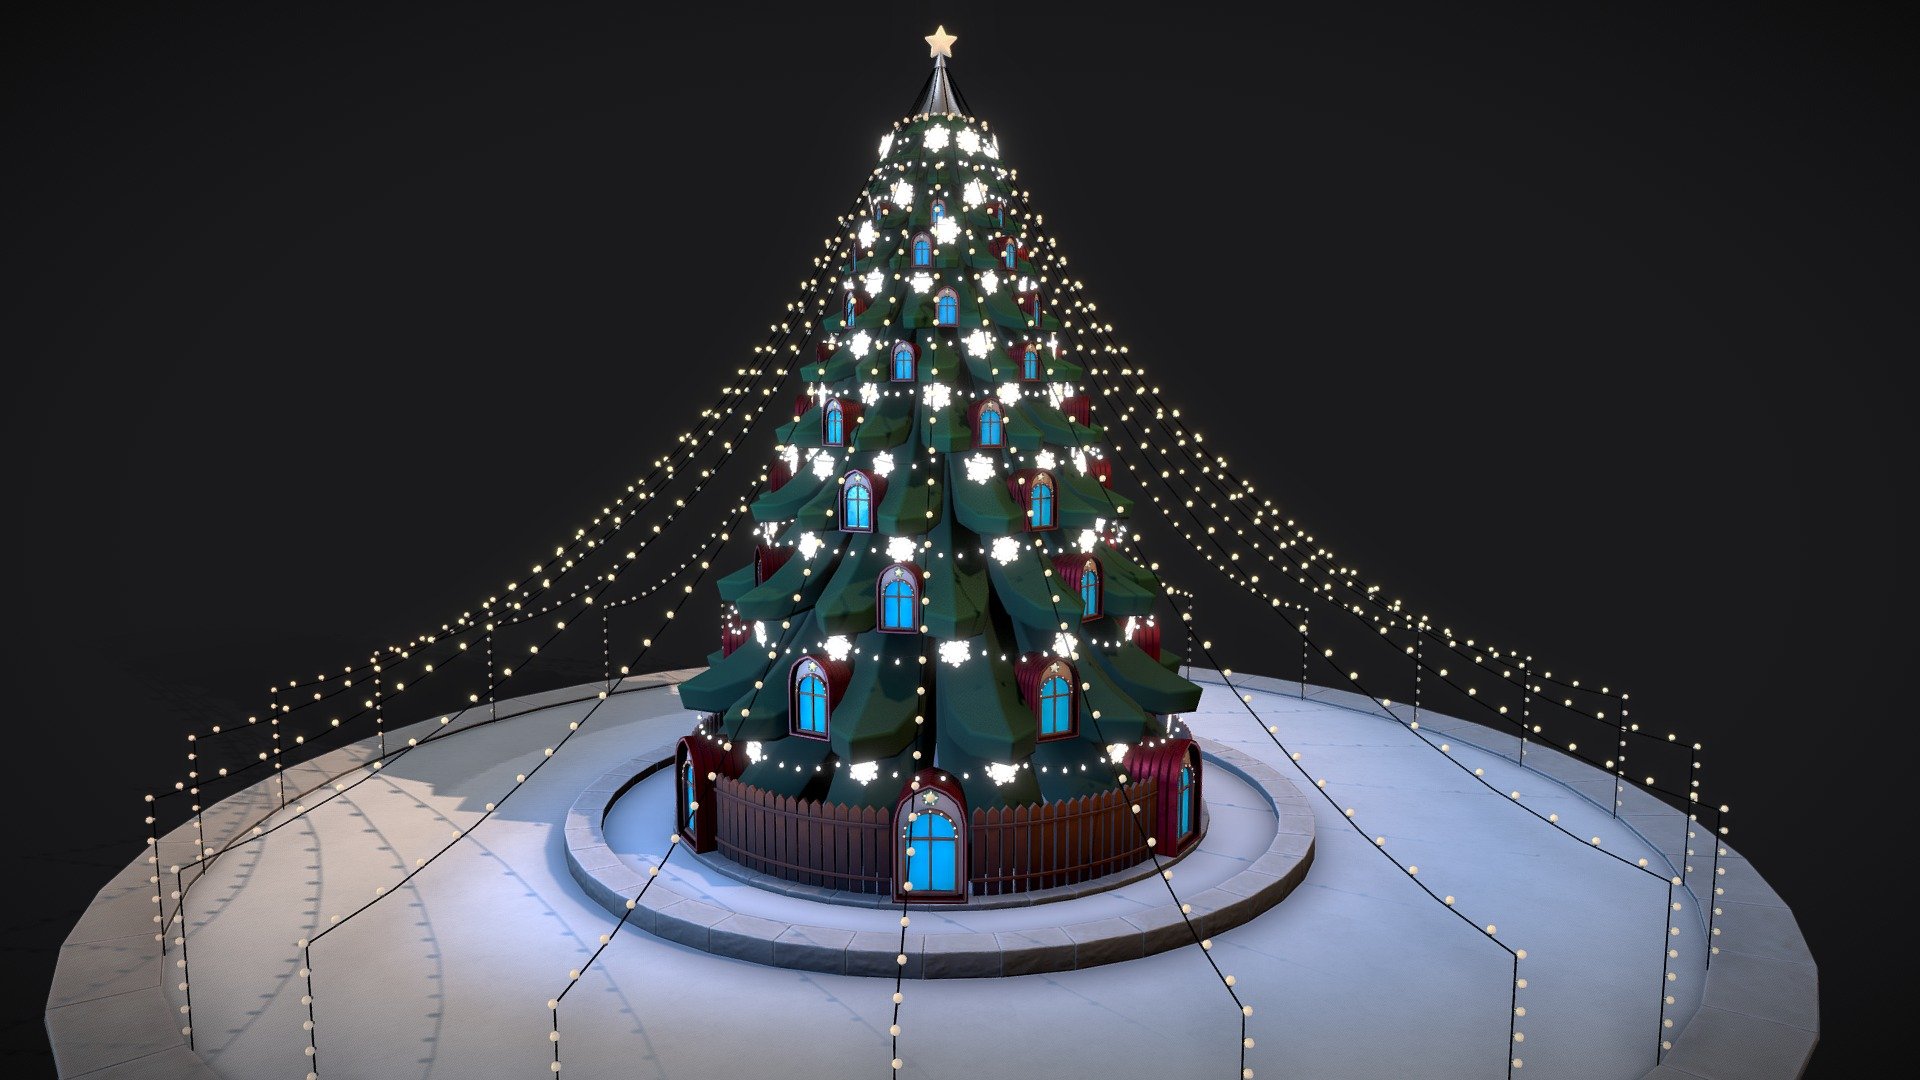 New Year Tree model.
PBR Metal-Roughness 8192 x 8192 Textures. 
Overlapping UV’s. 
Real-World Scale. 
Made in Maya, Marmoset Toolbag and Substance Painter. Happy Holidays!
 - Stylized New Year Tree - Download Free 3D model by Enkarra 3d model